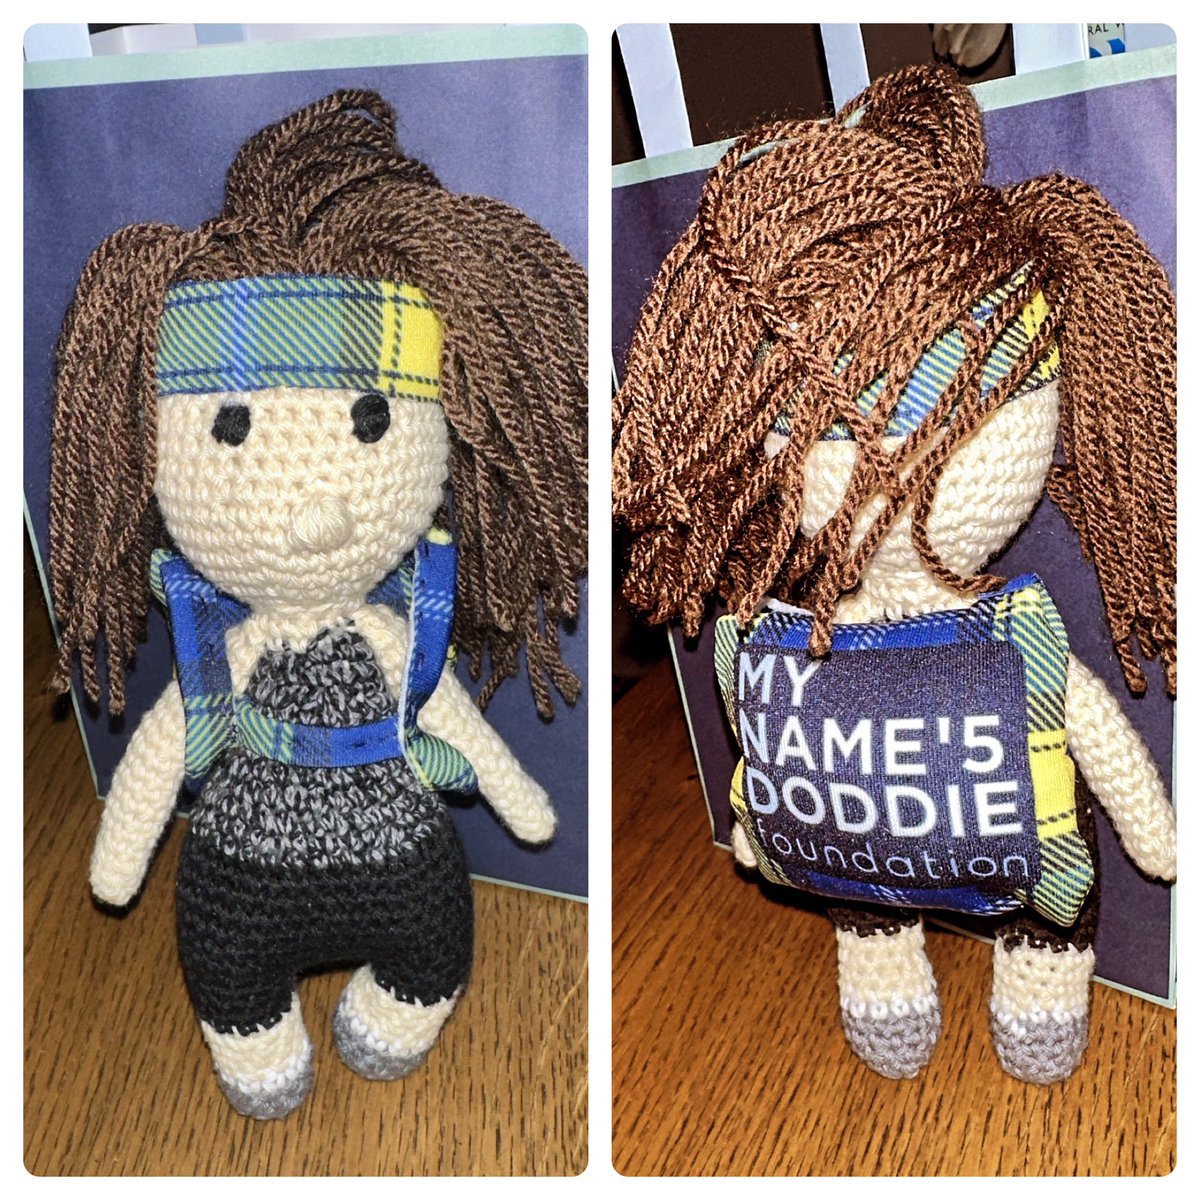 Thank you Trudi for making us this very special @MNDoddie5 mascot for the 24 Peaks in 24 Hours challenge. 

Trudi very cleverly made this out of a Myname5doddie headband which her husband Jerry had from the men’s challenge last year. 💙⛰️🥁